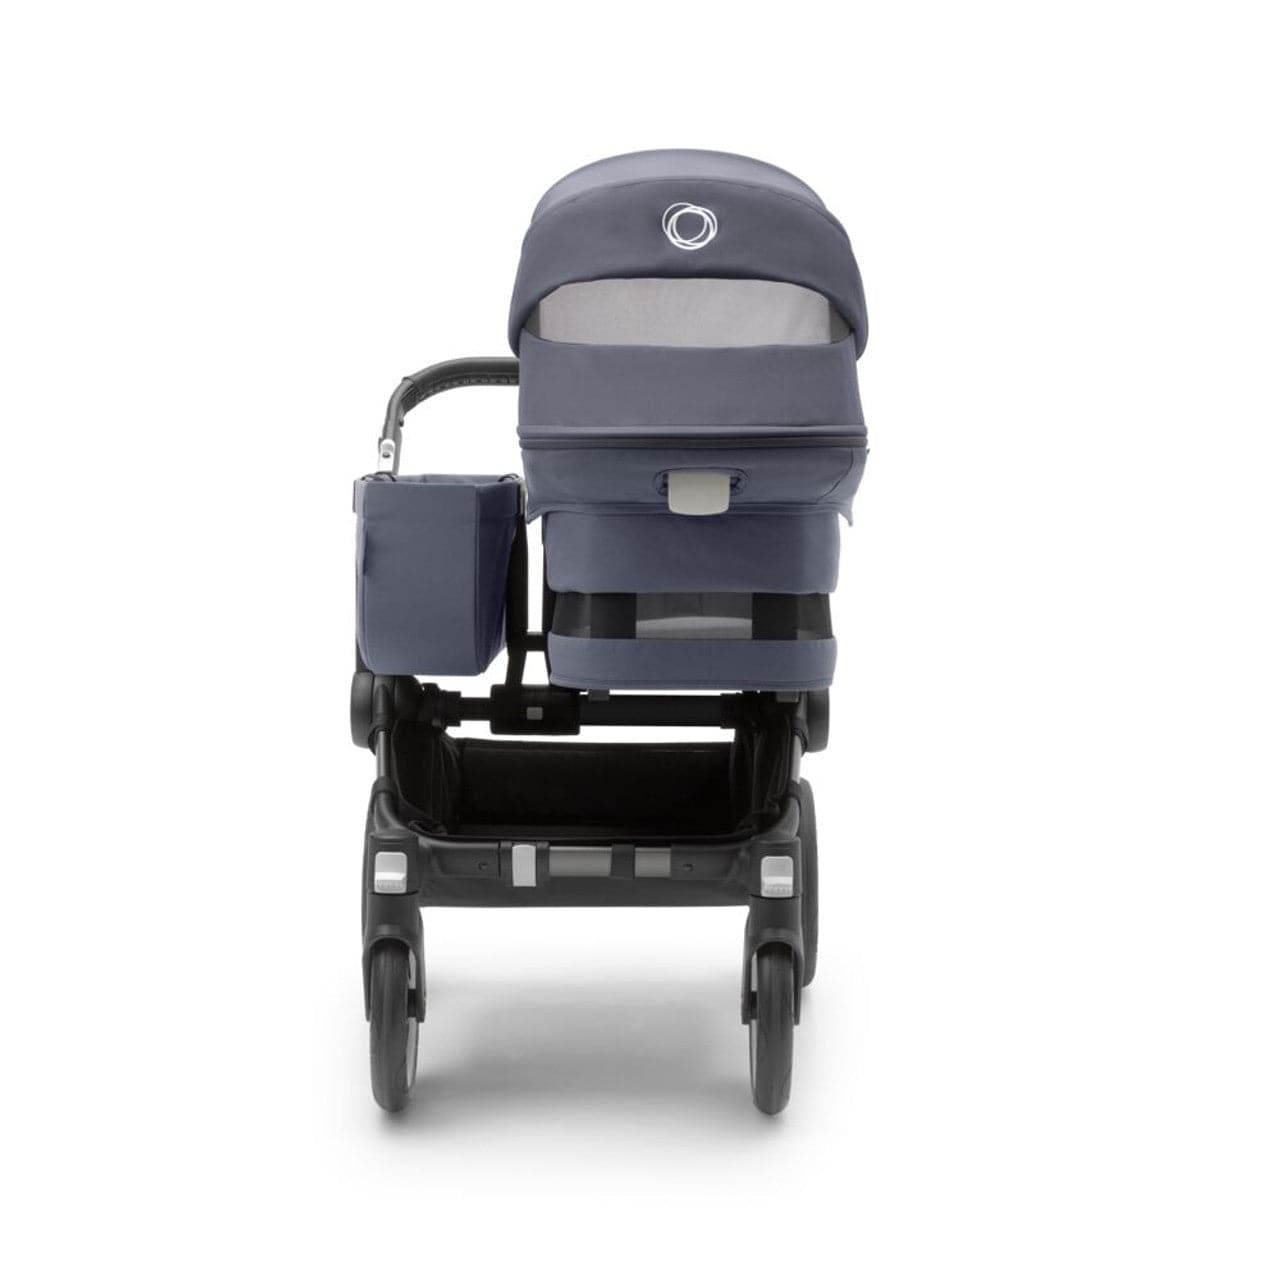 Bugaboo Donkey 5 Mono Complete Pushchair - Black/Midnight Black -  | For Your Little One